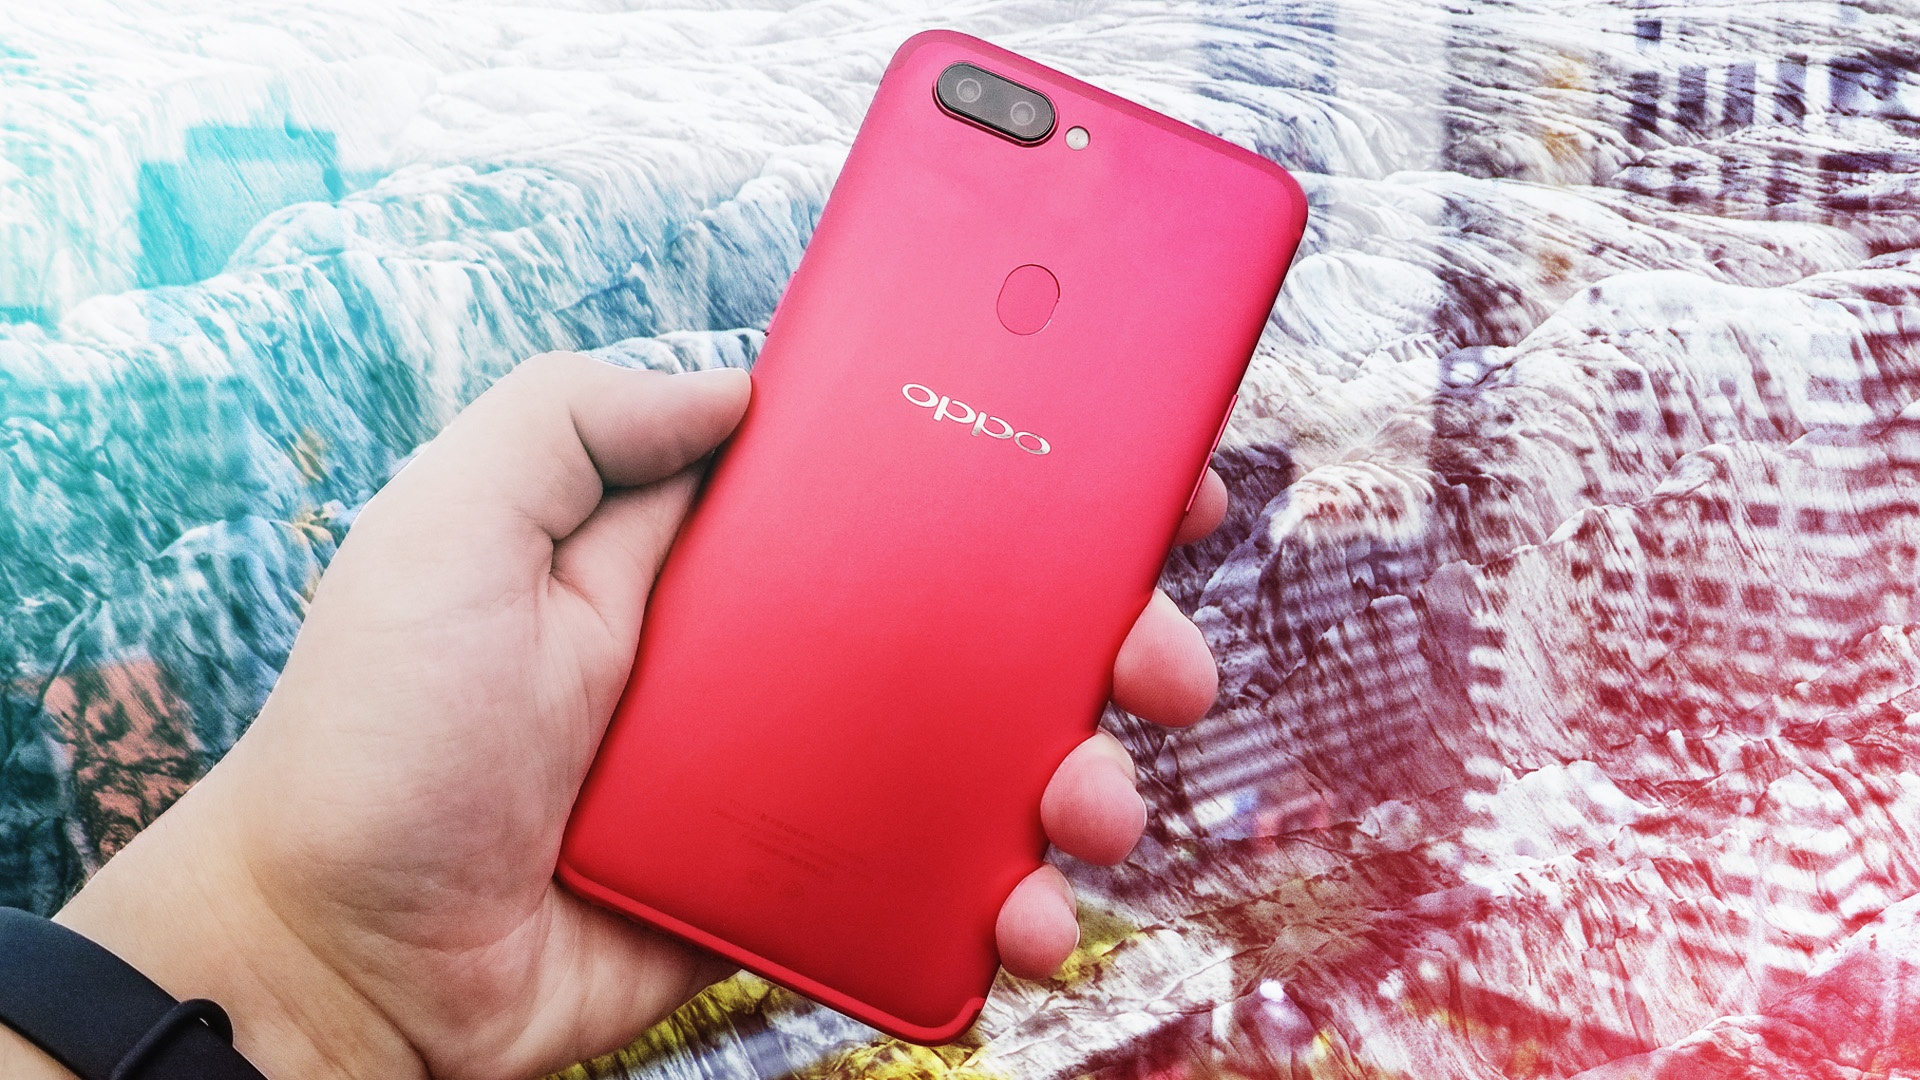 Oppo R11s hands-on - Android Authority